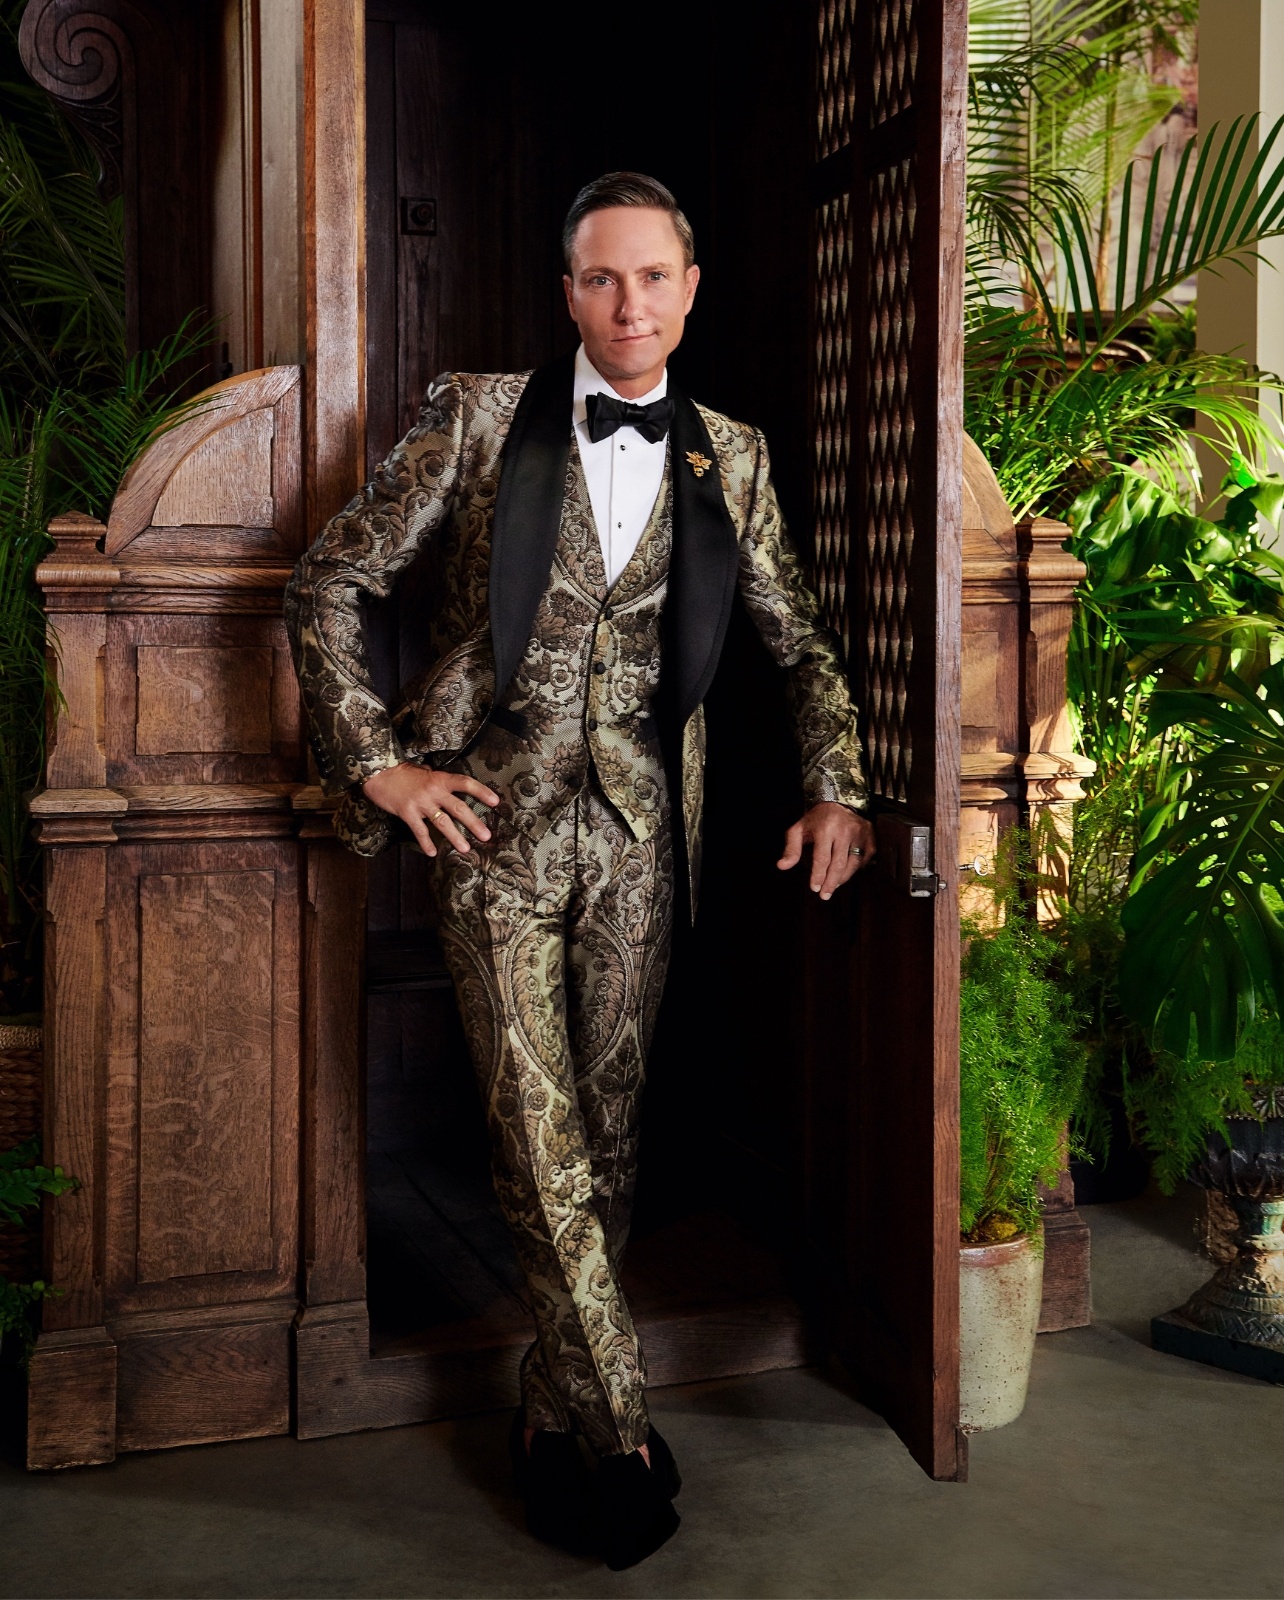 Portrait of Ken Fulk wearing a black and gold suit photographed by Brendan Mainini